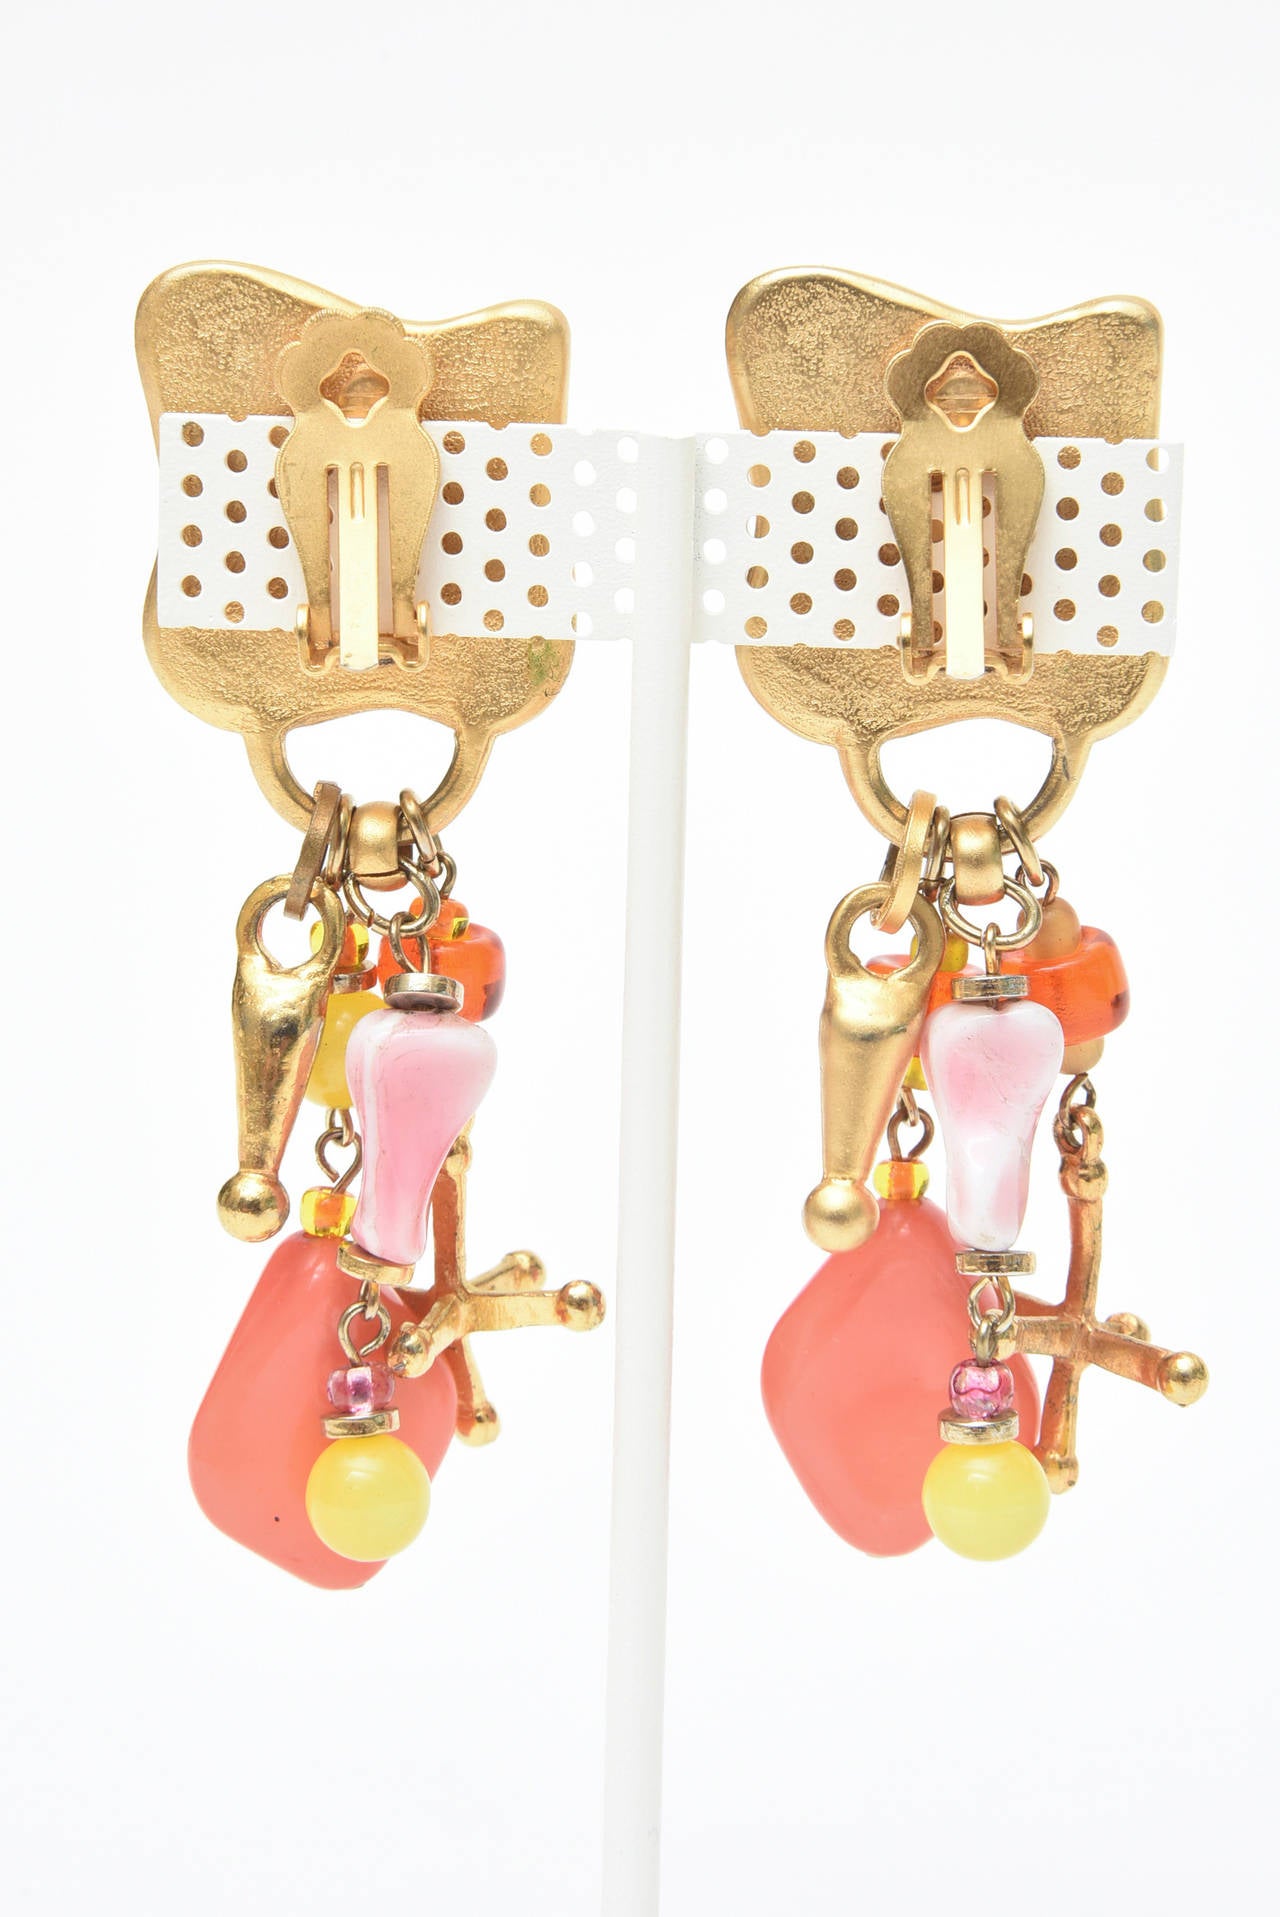 The luscious colors of coral, orange, pink and yellow of these playful and happy earrings are set against gold tone. Call them beach, resort, poolside or St. Barths.. They are signed on the back by Robert Rose and are clip on earrings.
The dangling